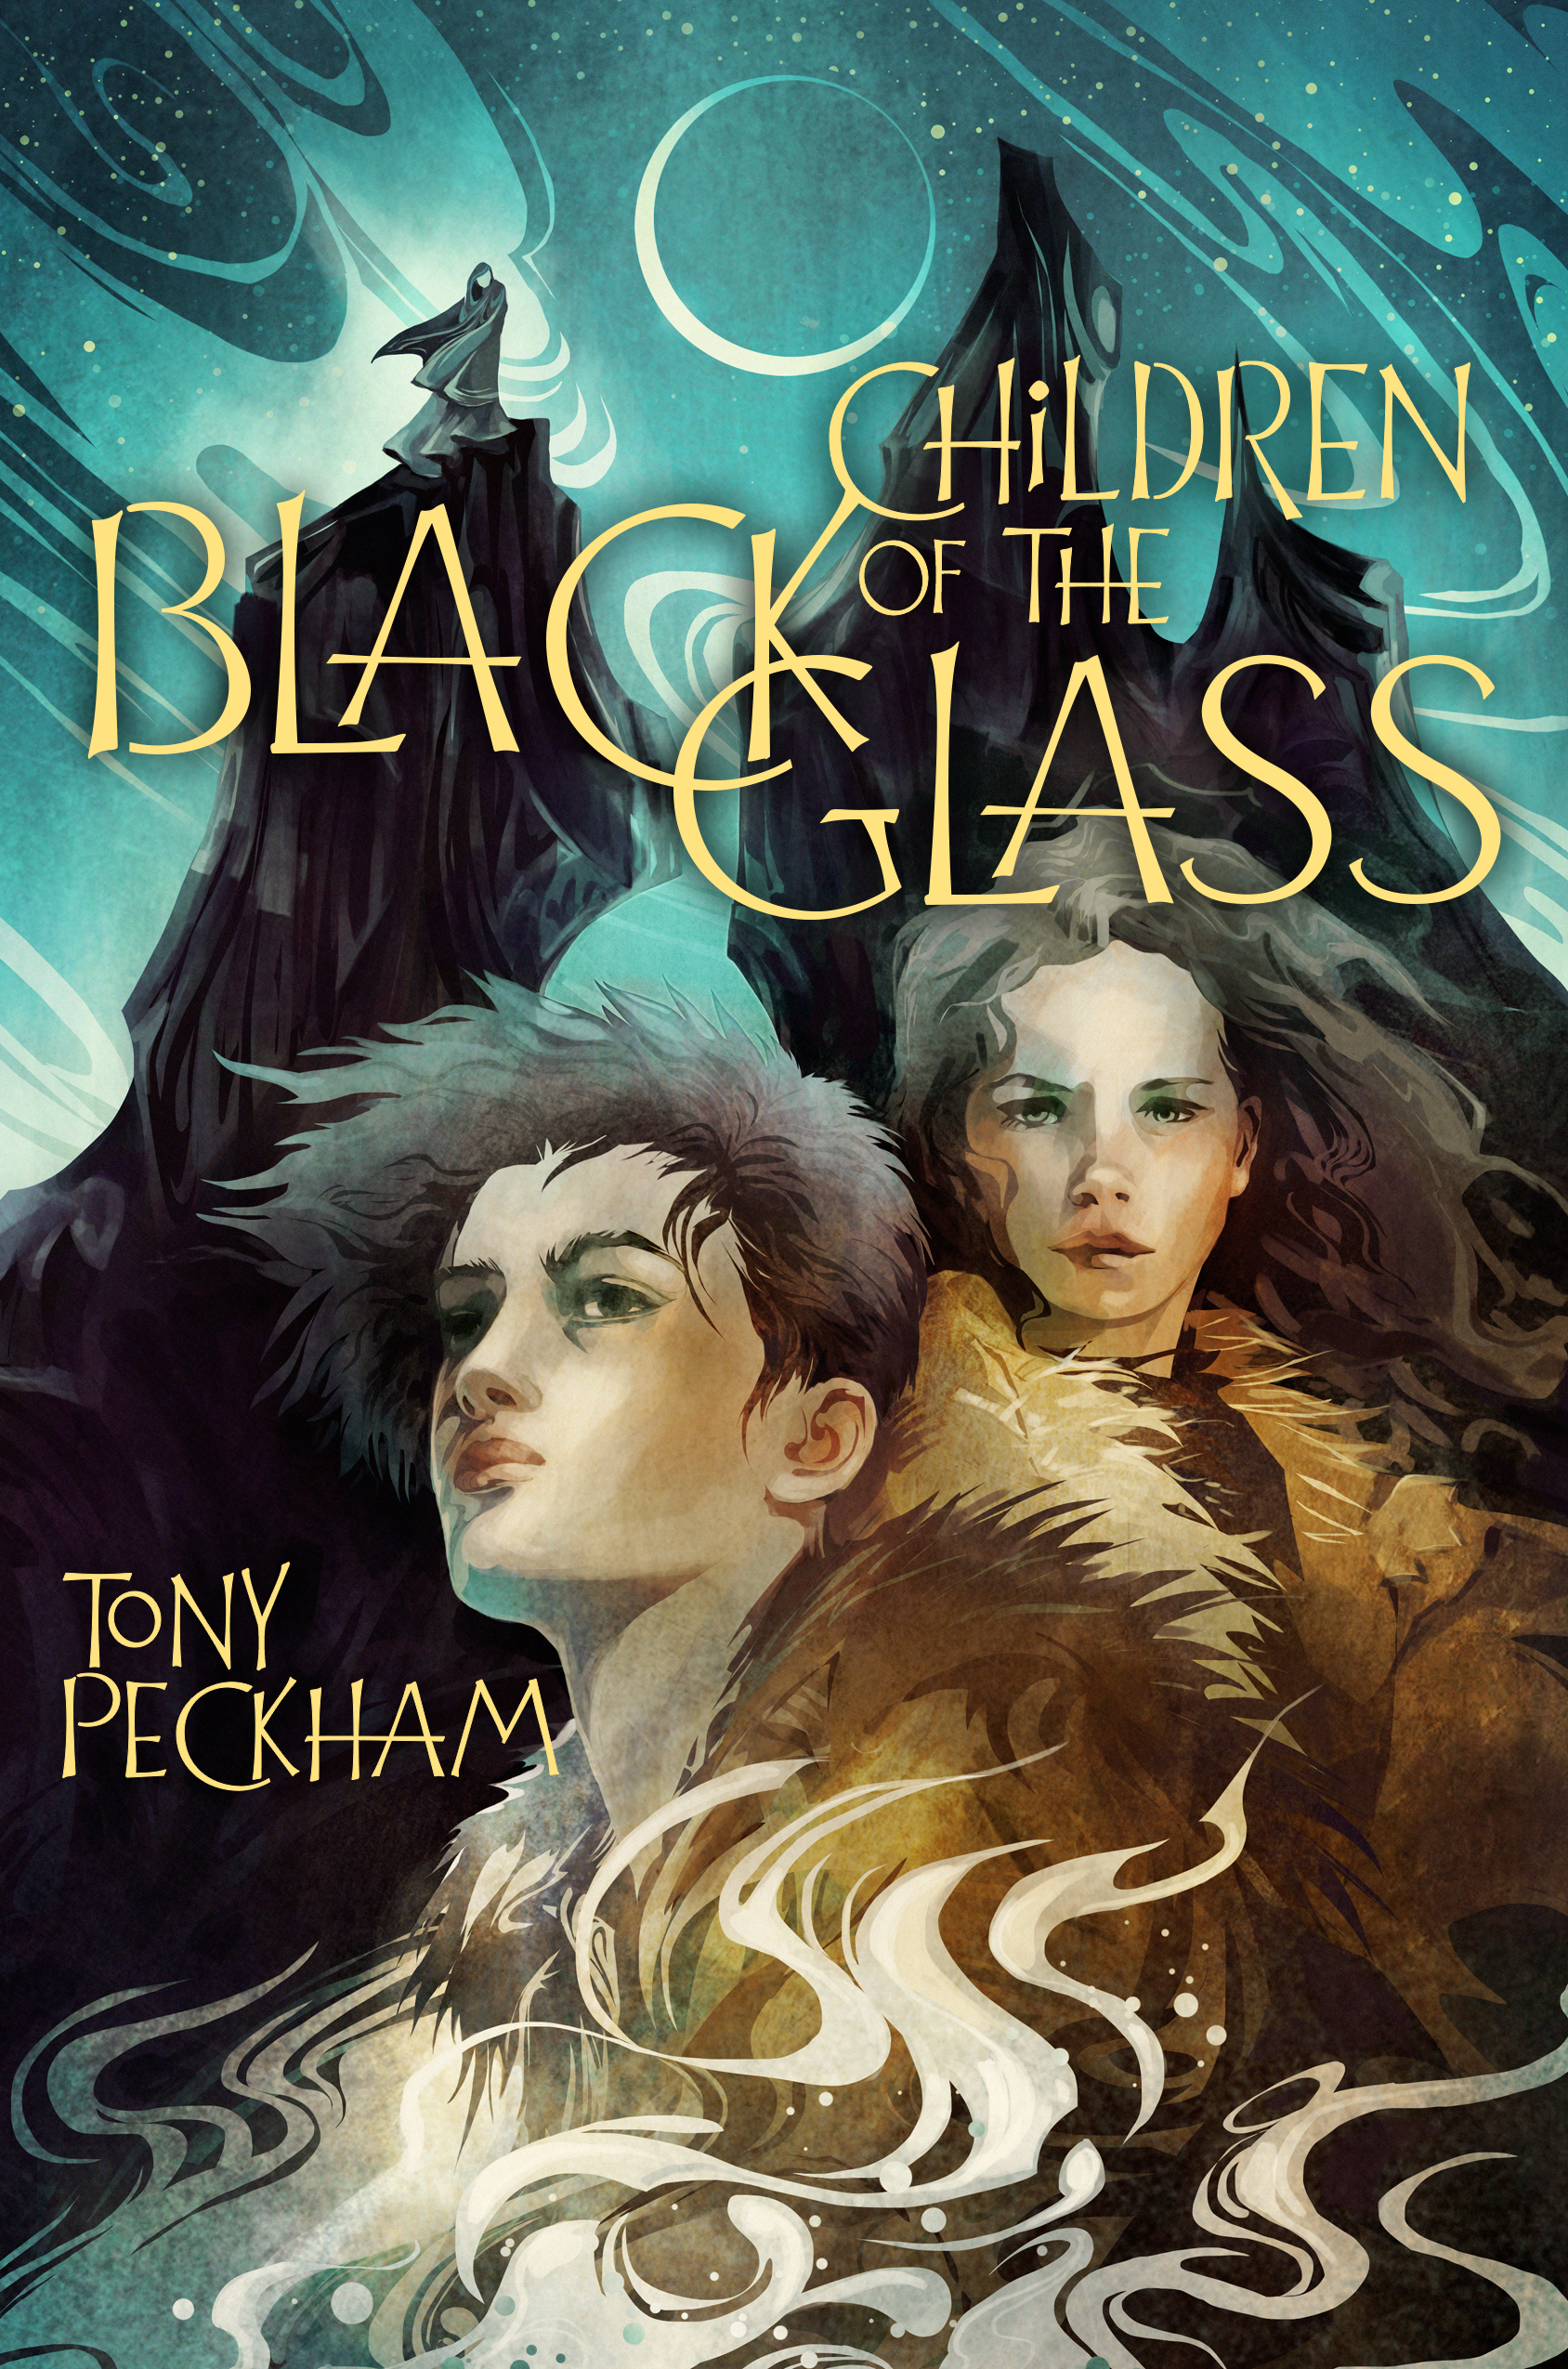 Children of the Black Glass: A Bedtime Story, a guest post by Tony Peckham